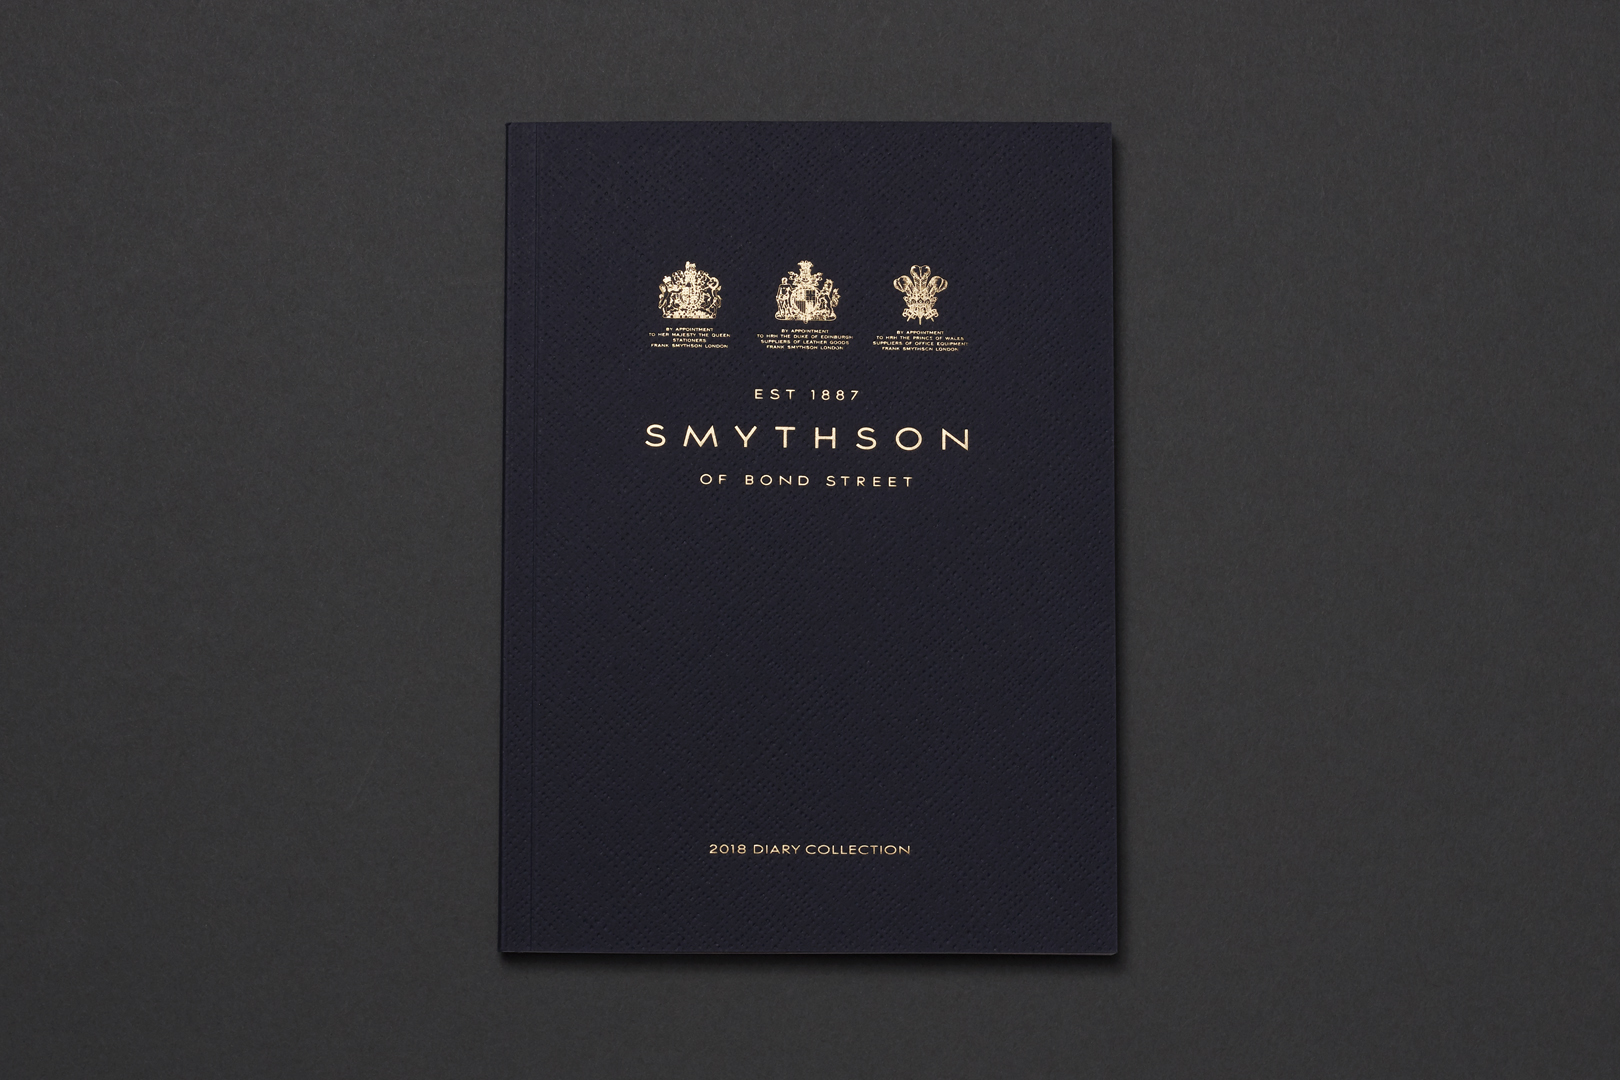 Smythson of Bond Street - With the prospect of restrictions easing, get  your plans down on paper with our mid-year diaries. Discover more here:  smythson.com/uk/diaries-and-books/diaries/mid-year-diaries #Smythson # Notebook #Leather #Diary #Pen